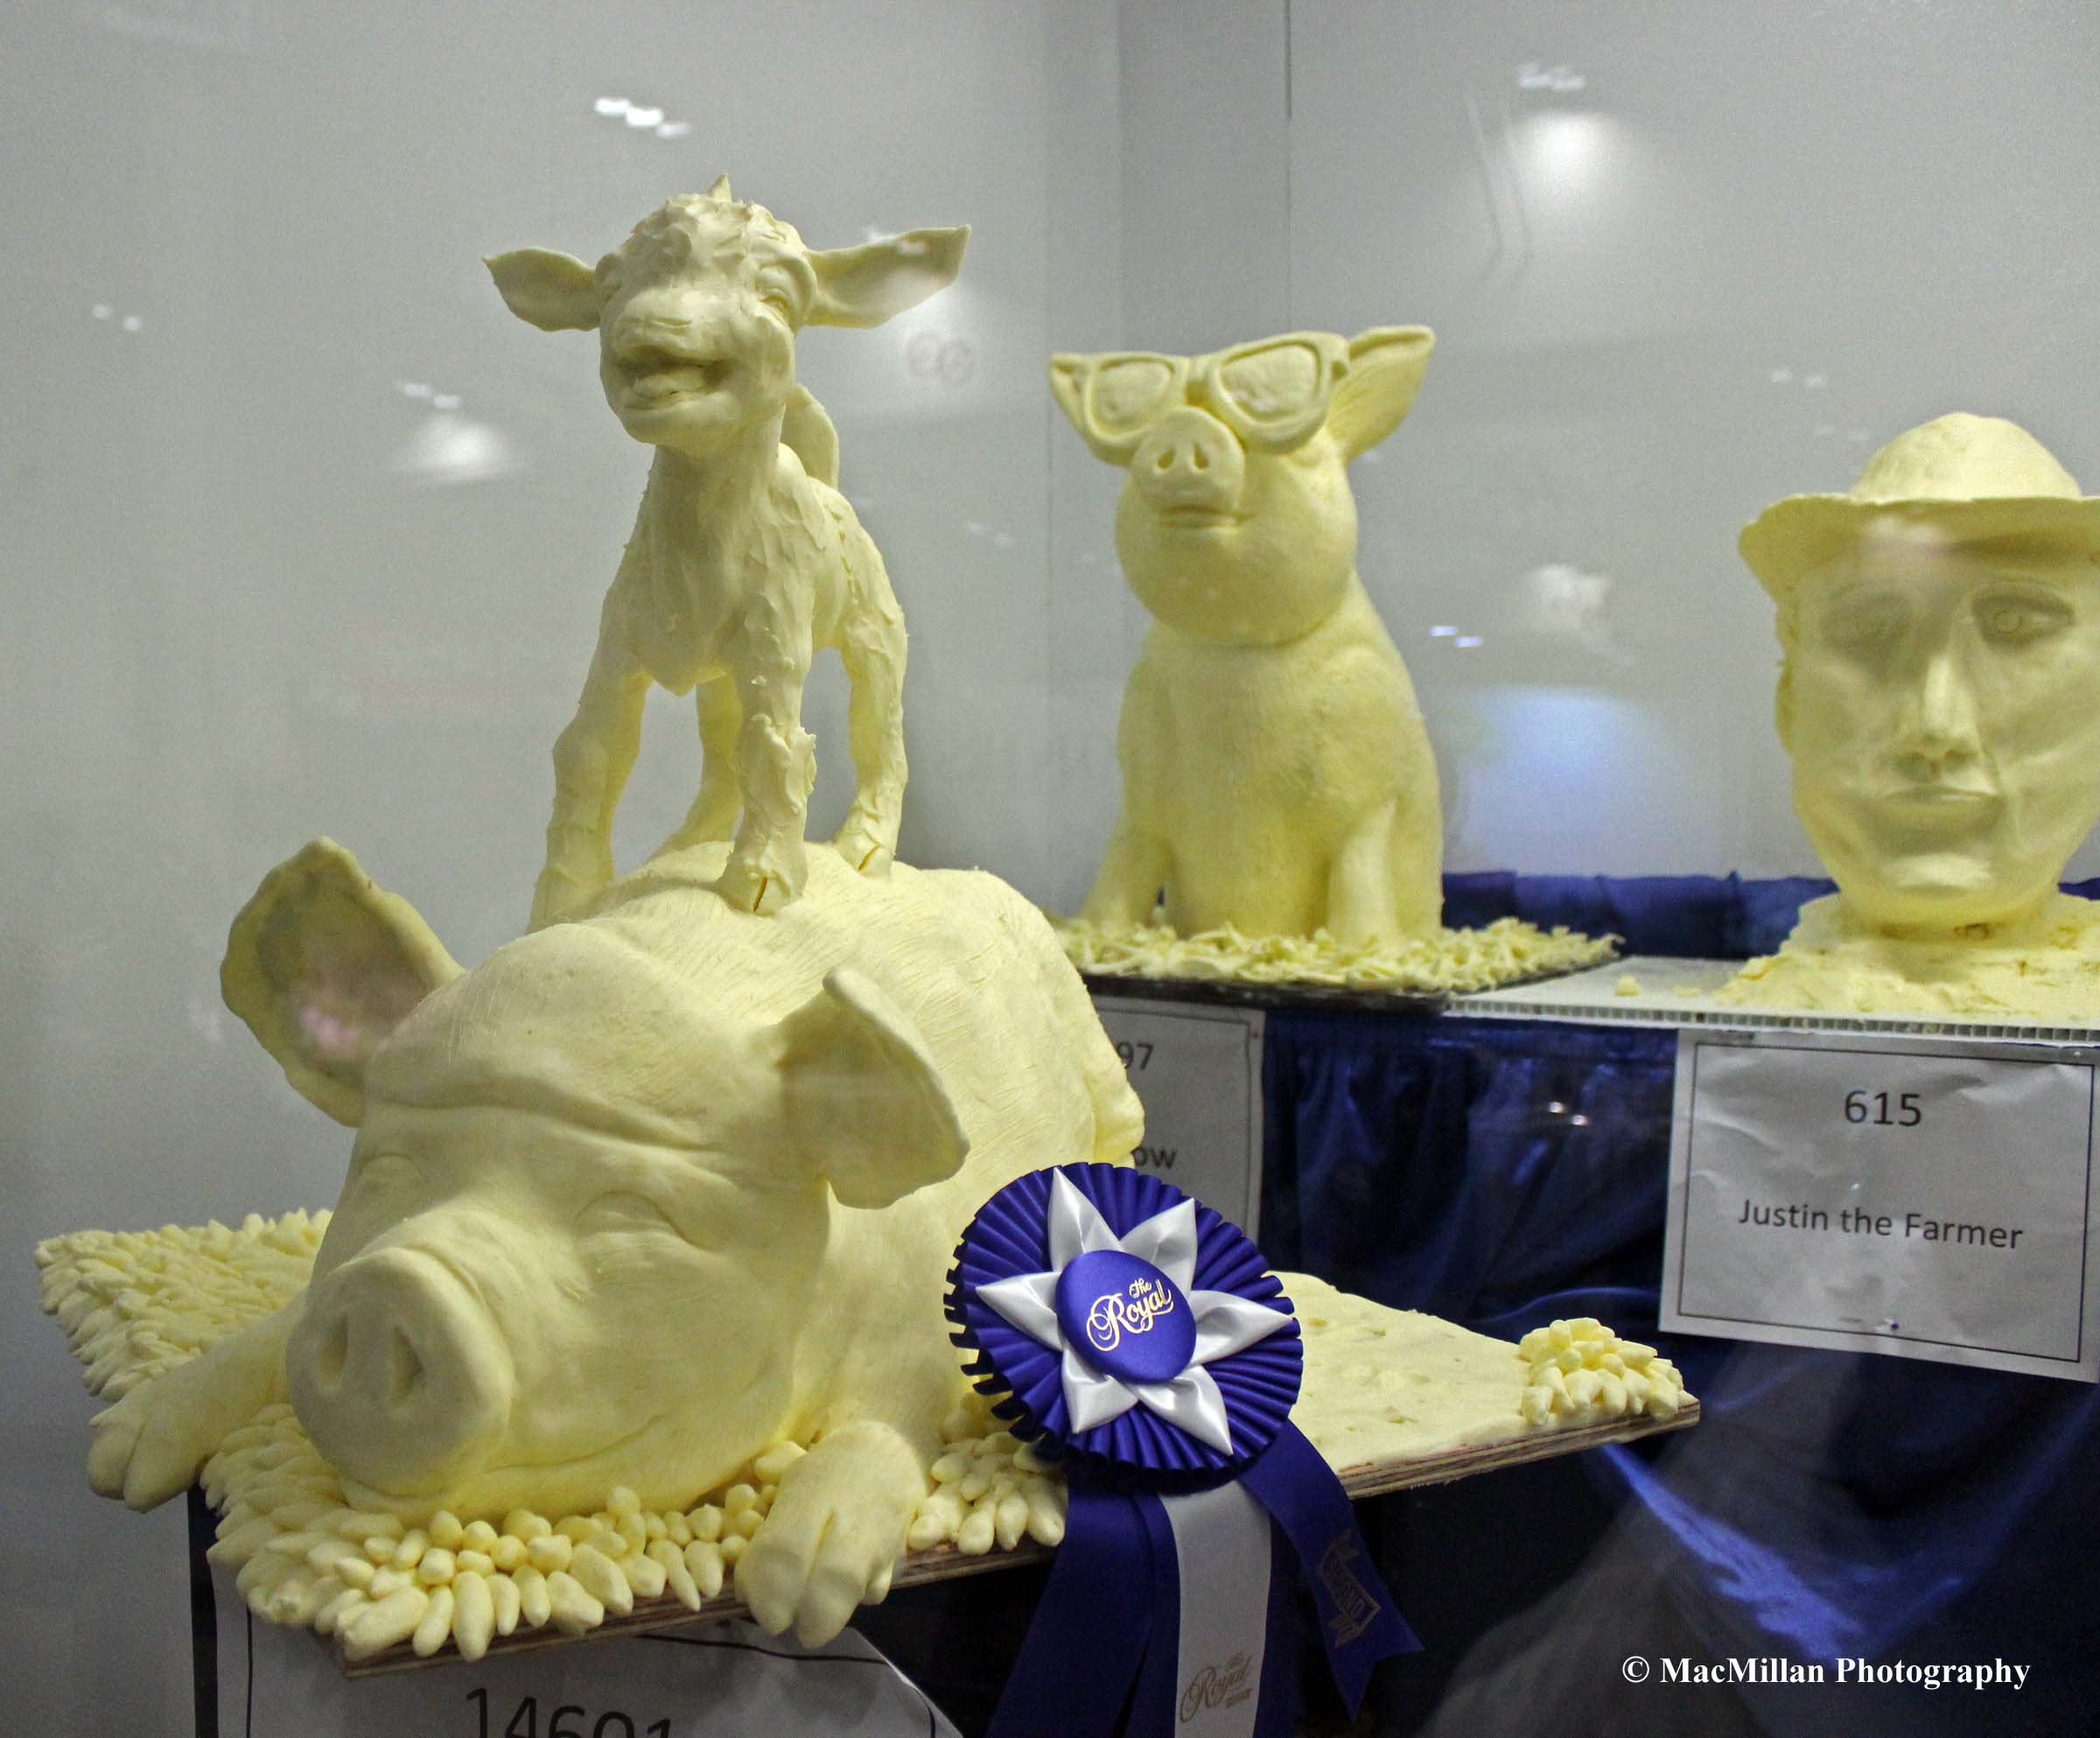 Photo 36 - The Royal butter sculpture competition is very popular with spectators. This year’s second-place entry (in Canada a blue ribbon is second place) was called “Totes-Ma-Goats” by Vincenzina Care. Photo by Shelley Higgins/MacMillan Photography